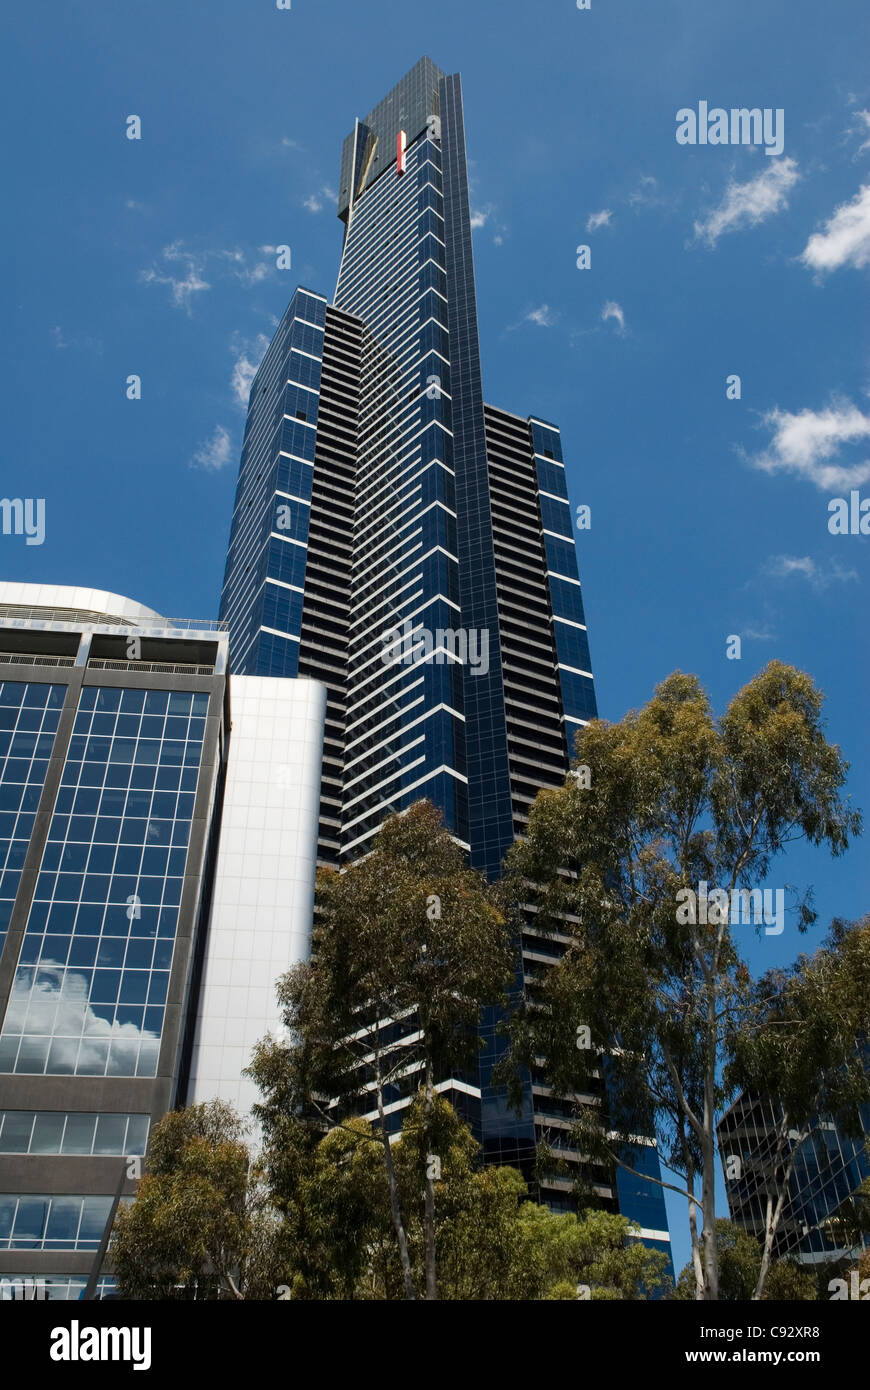 Eureka Tower is a skyscraper named after the Eureka Stockade a rebellion during the Victorian gold rush in 1854 which stands on Stock Photo